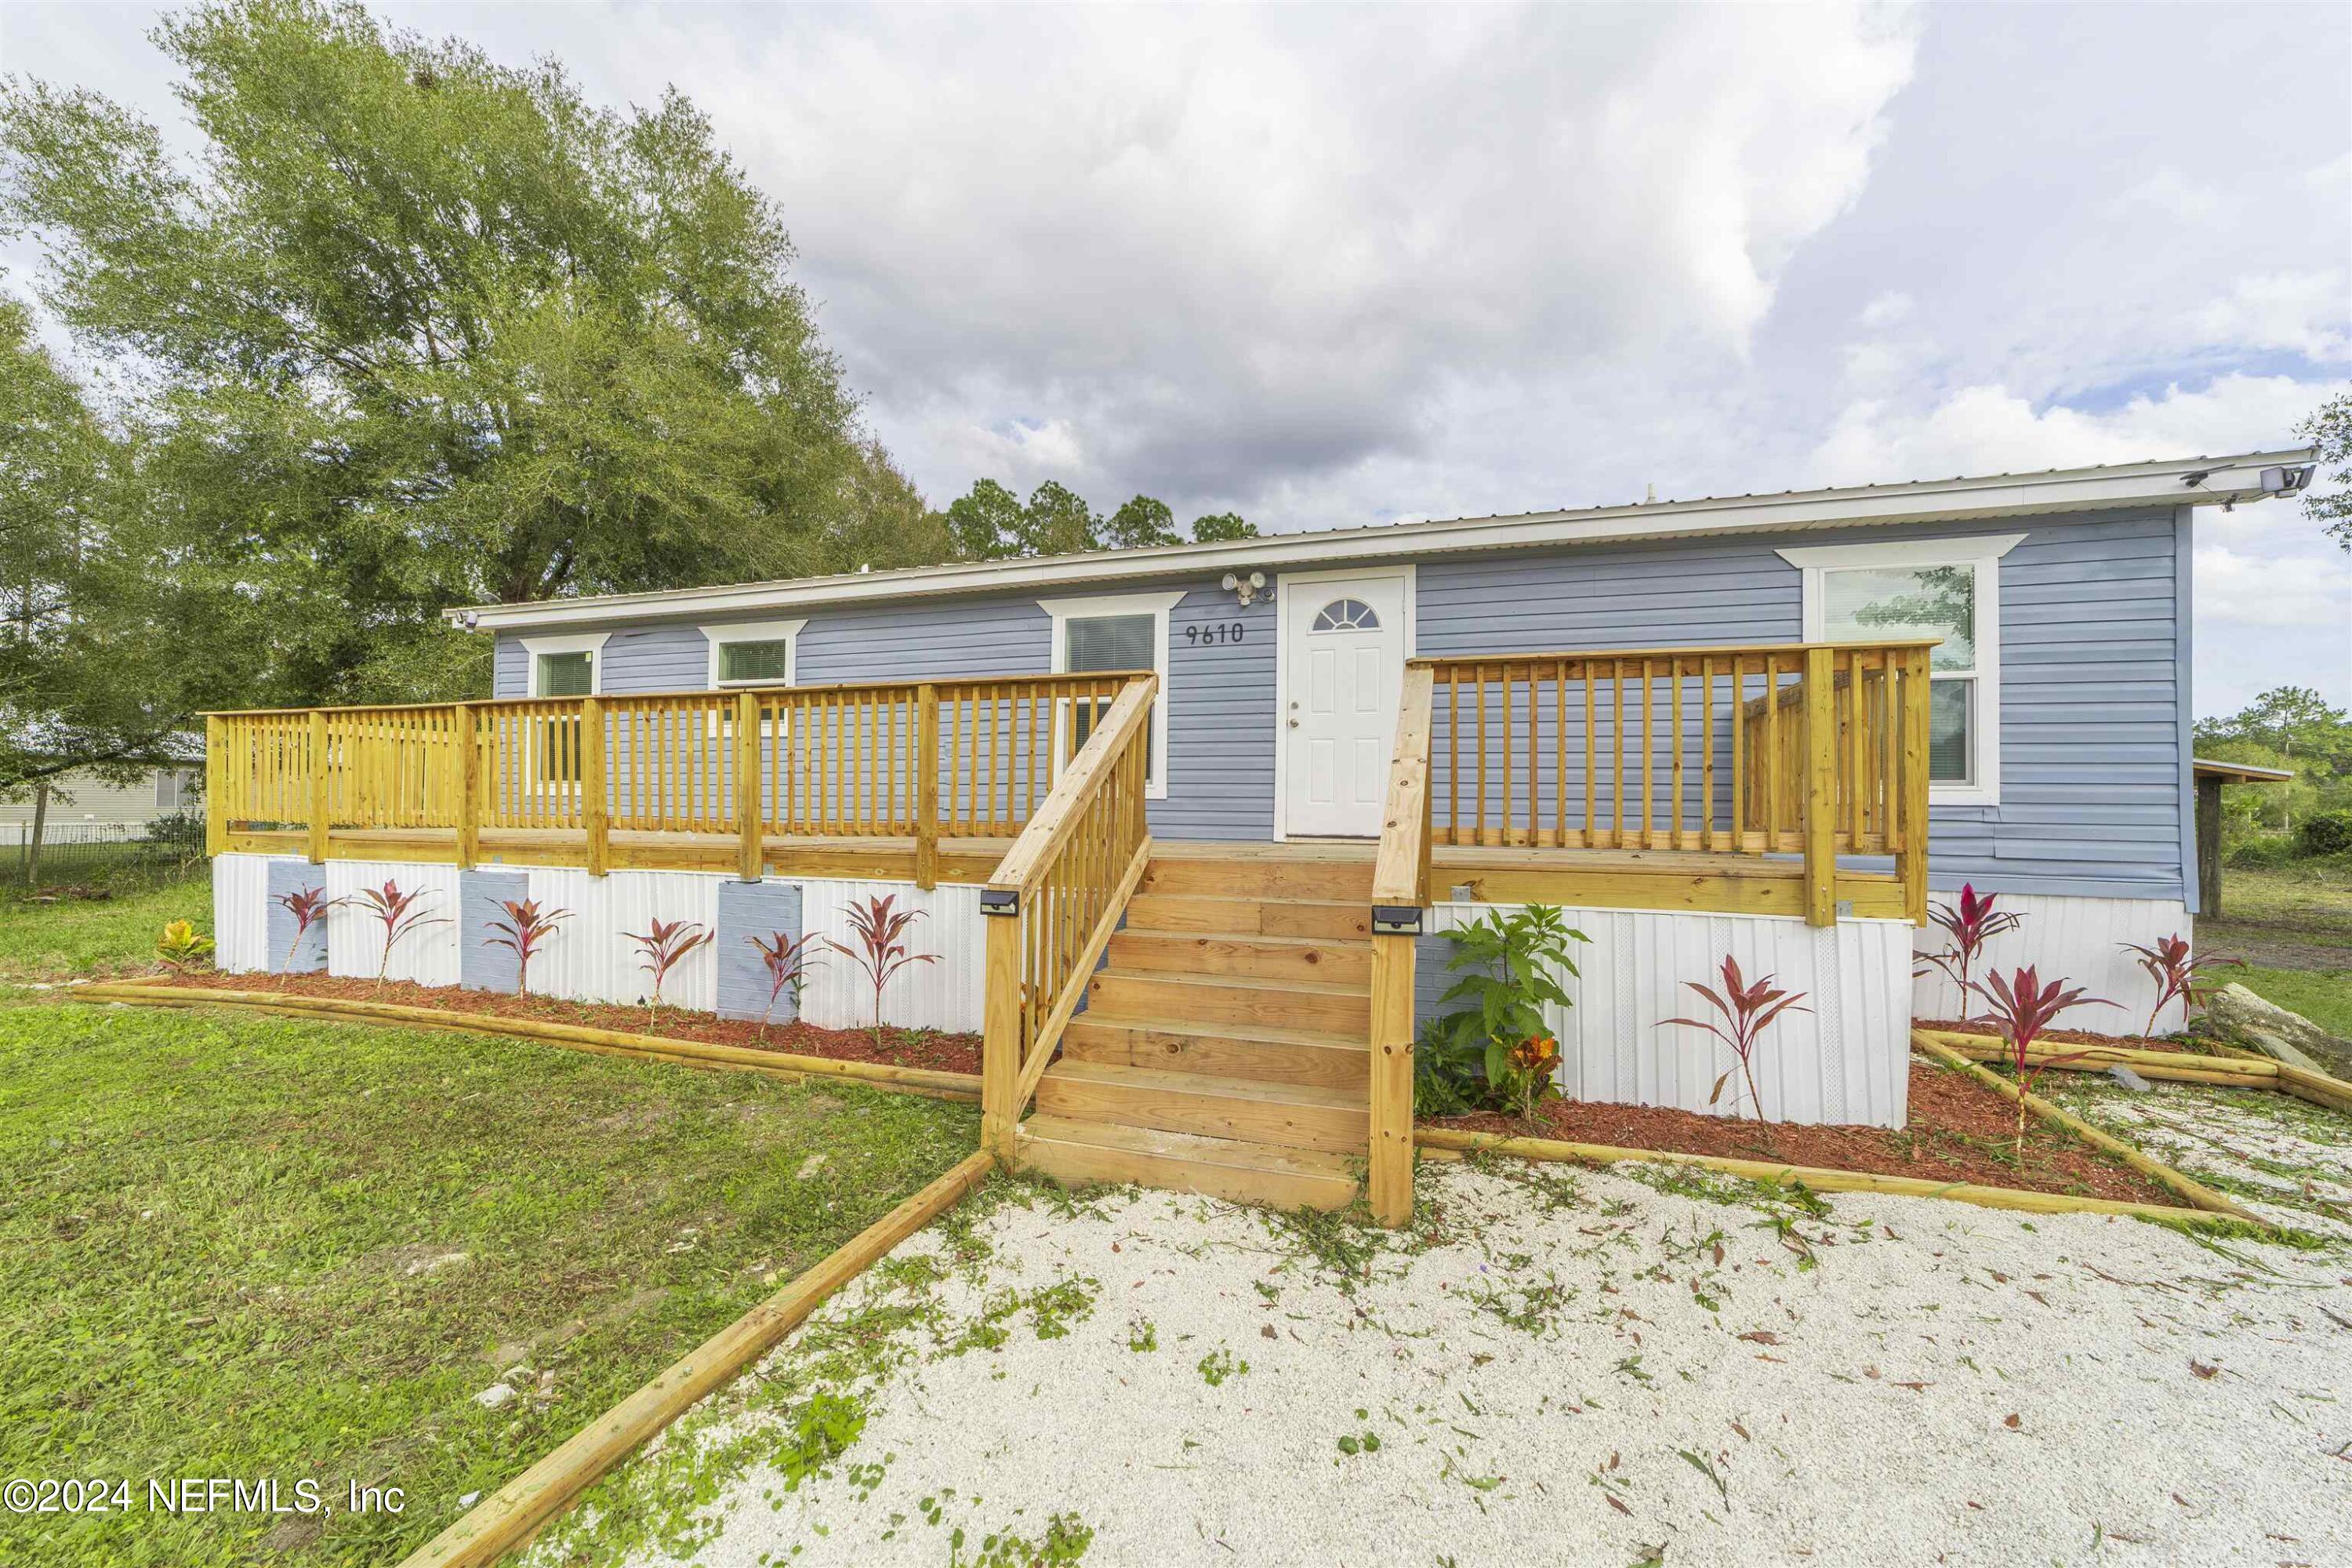 Hastings, FL home for sale located at 9610 Ebert Avenue, Hastings, FL 32145